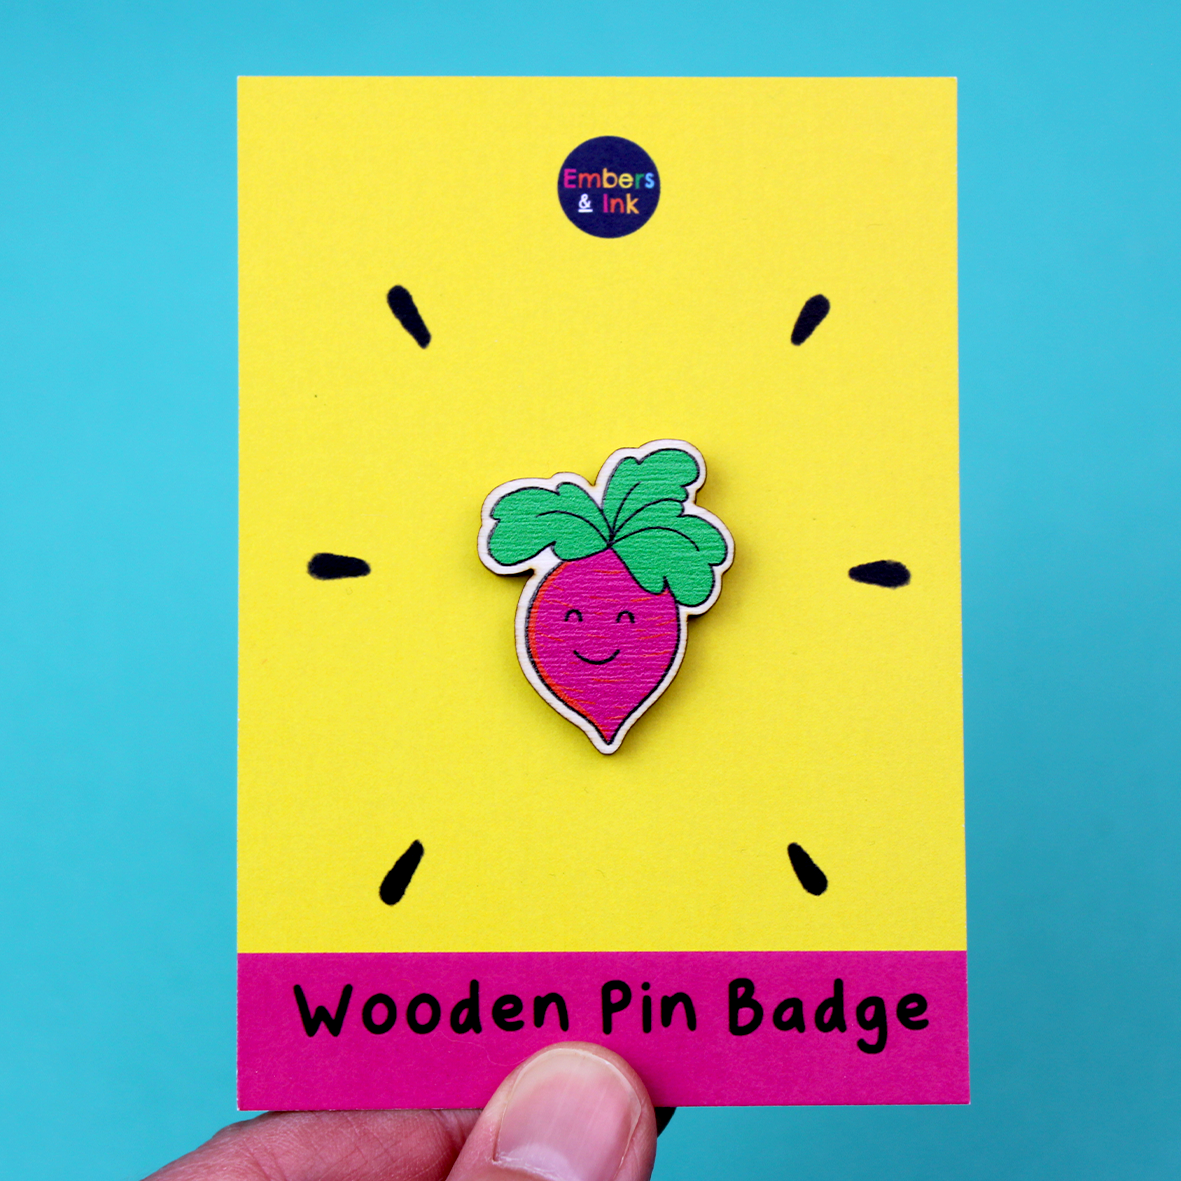 A wooden badge of a pink root vegetable with a smiling face and green leaf hair is shown on a yellow and pink backing board. At the bottom are the words Wooden Pin Badge.